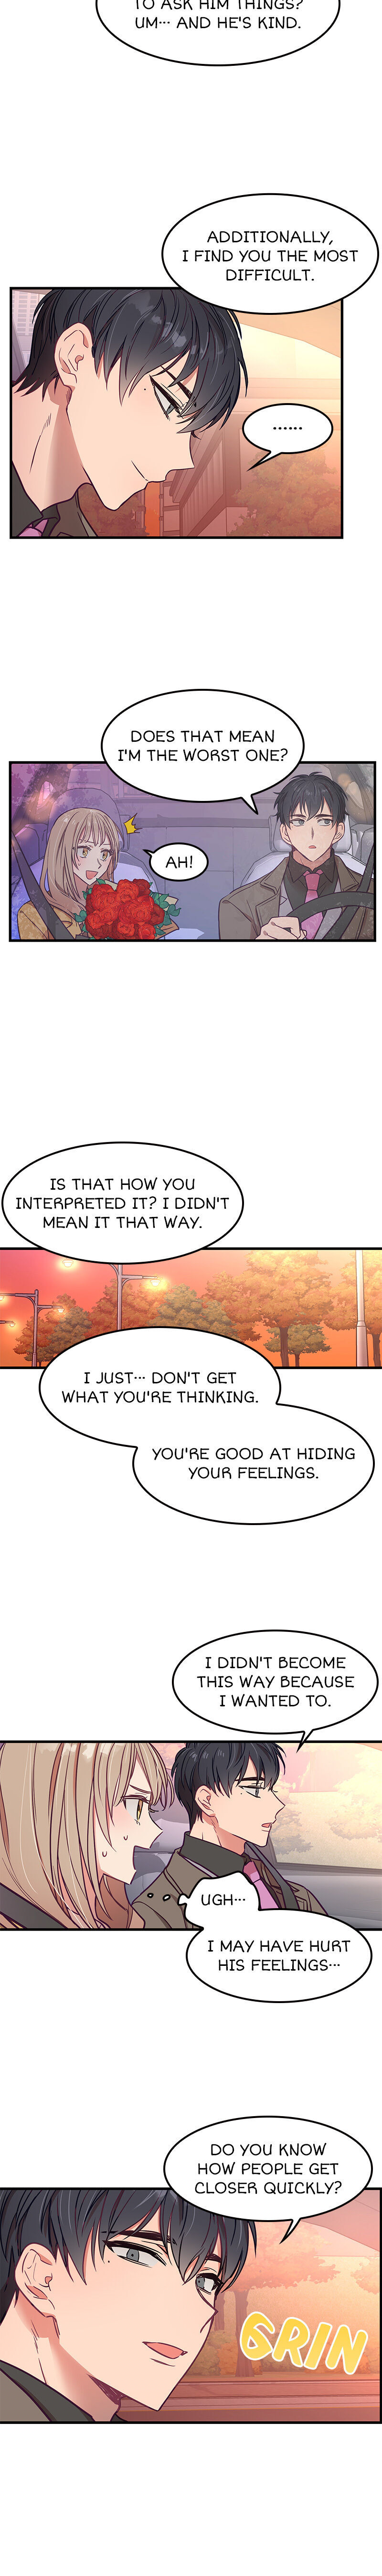 Him and Him and Him - Chapter 9 Page 8